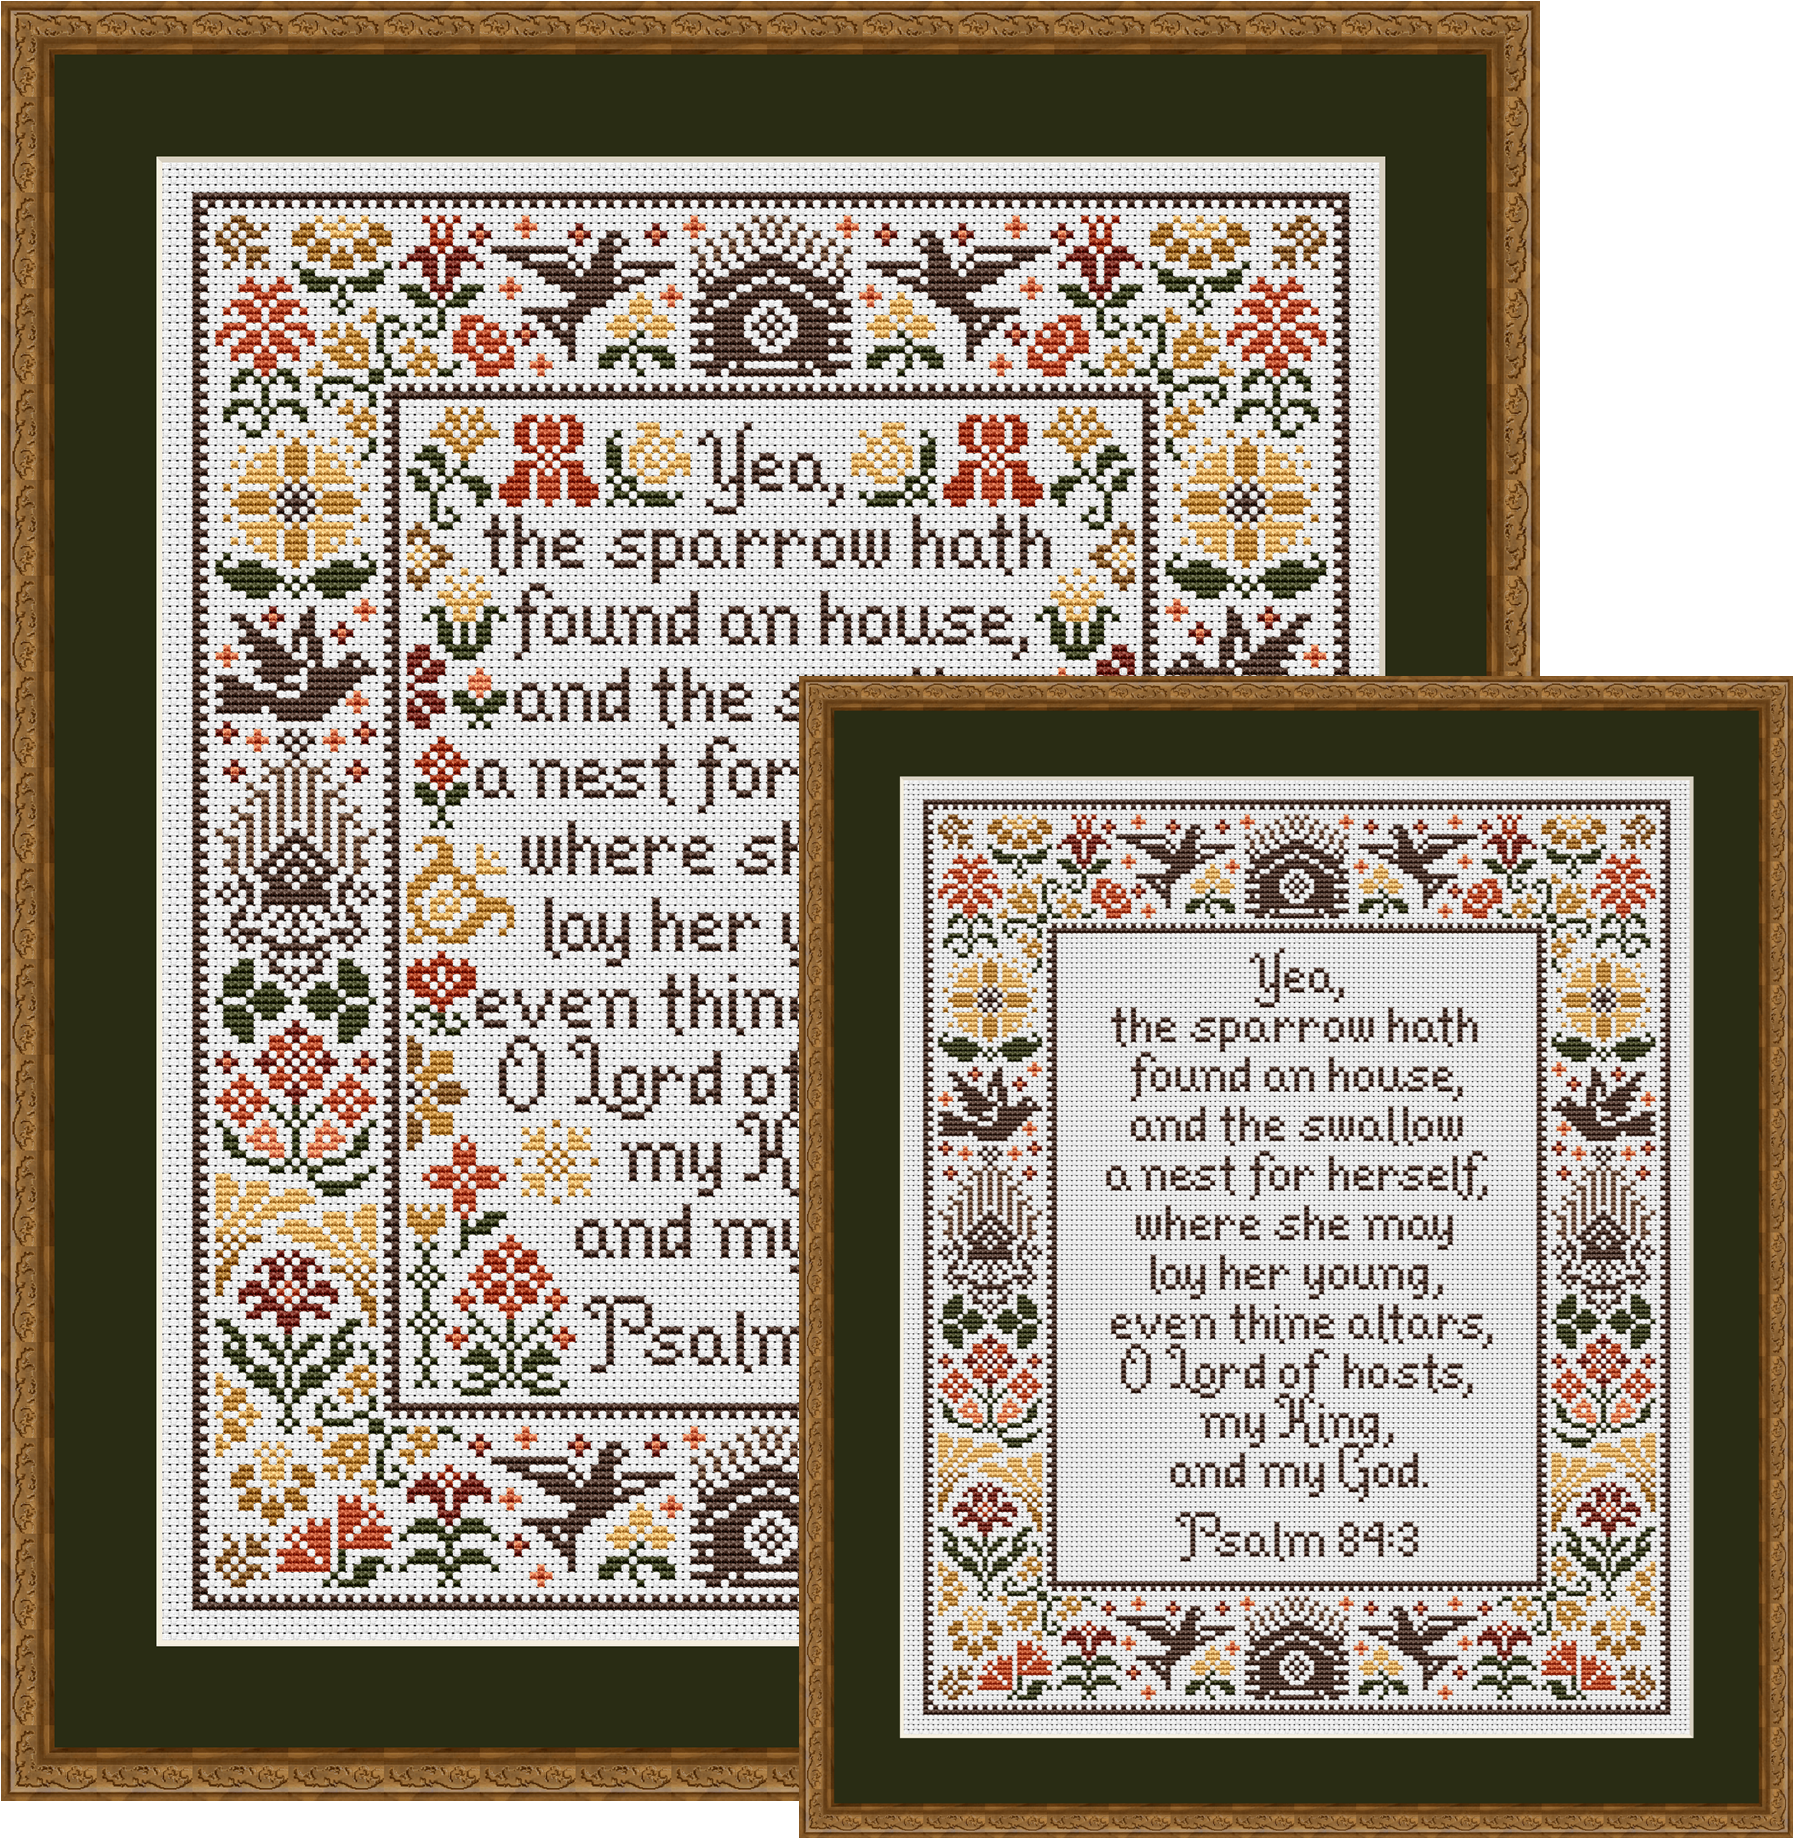 Late Summer Sparrows and Swallows Psalm 84:3 Pattern 2006-E